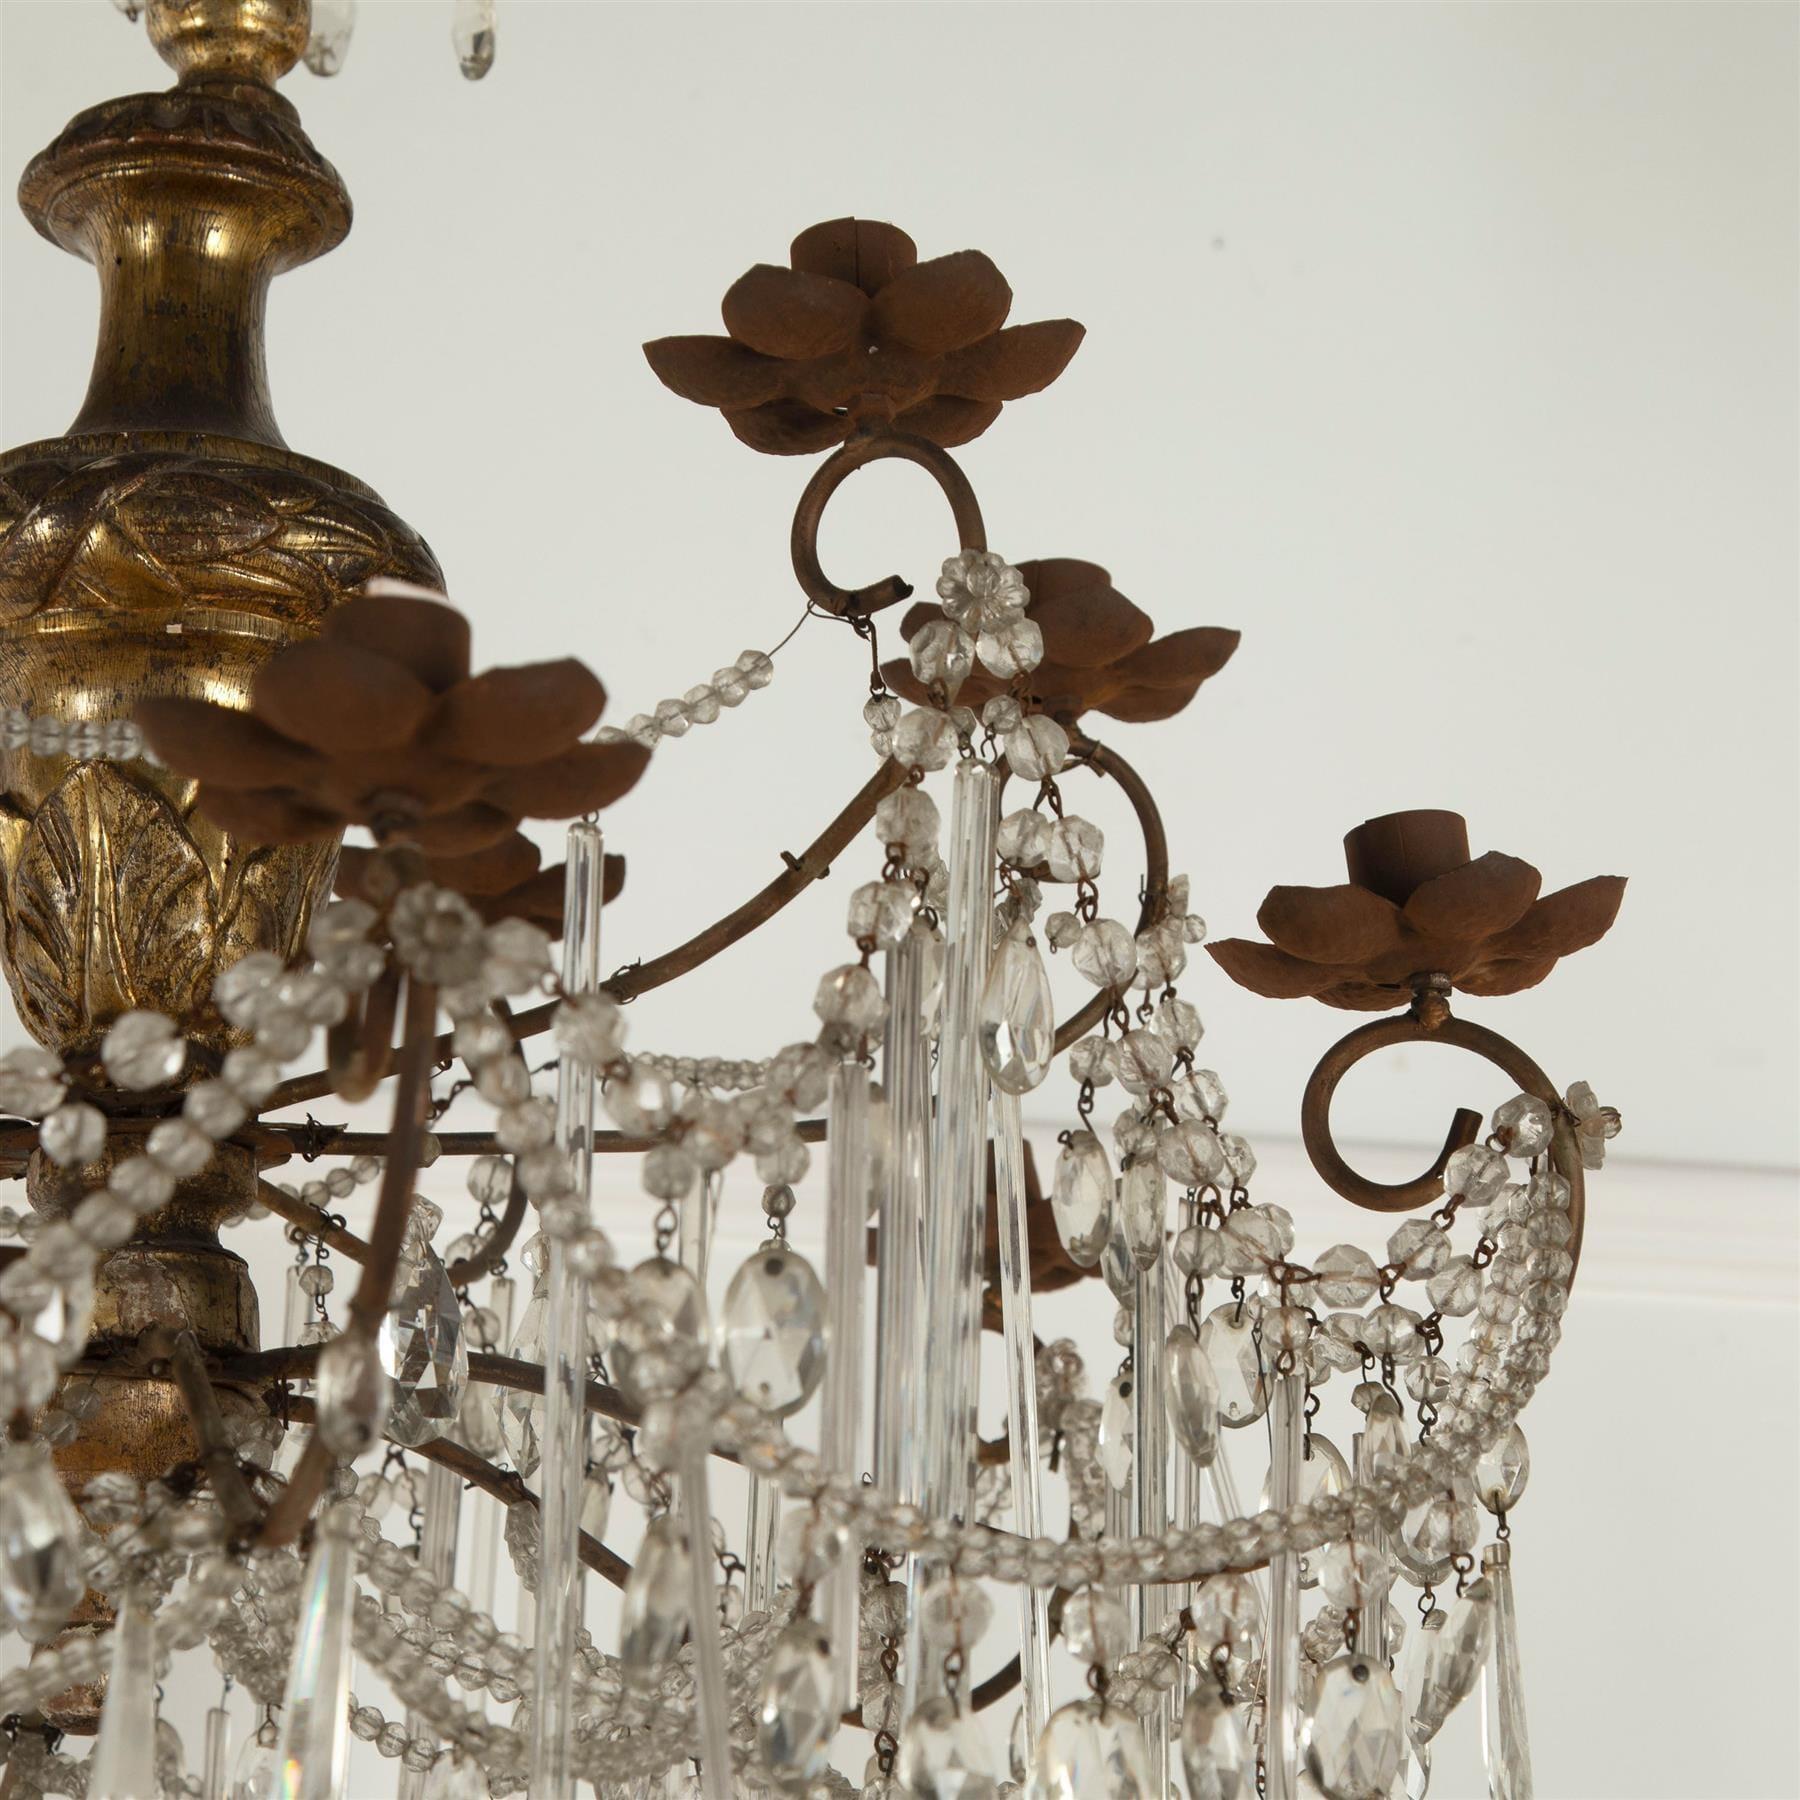 19th Century Italian Chandelier with Silvered Stem